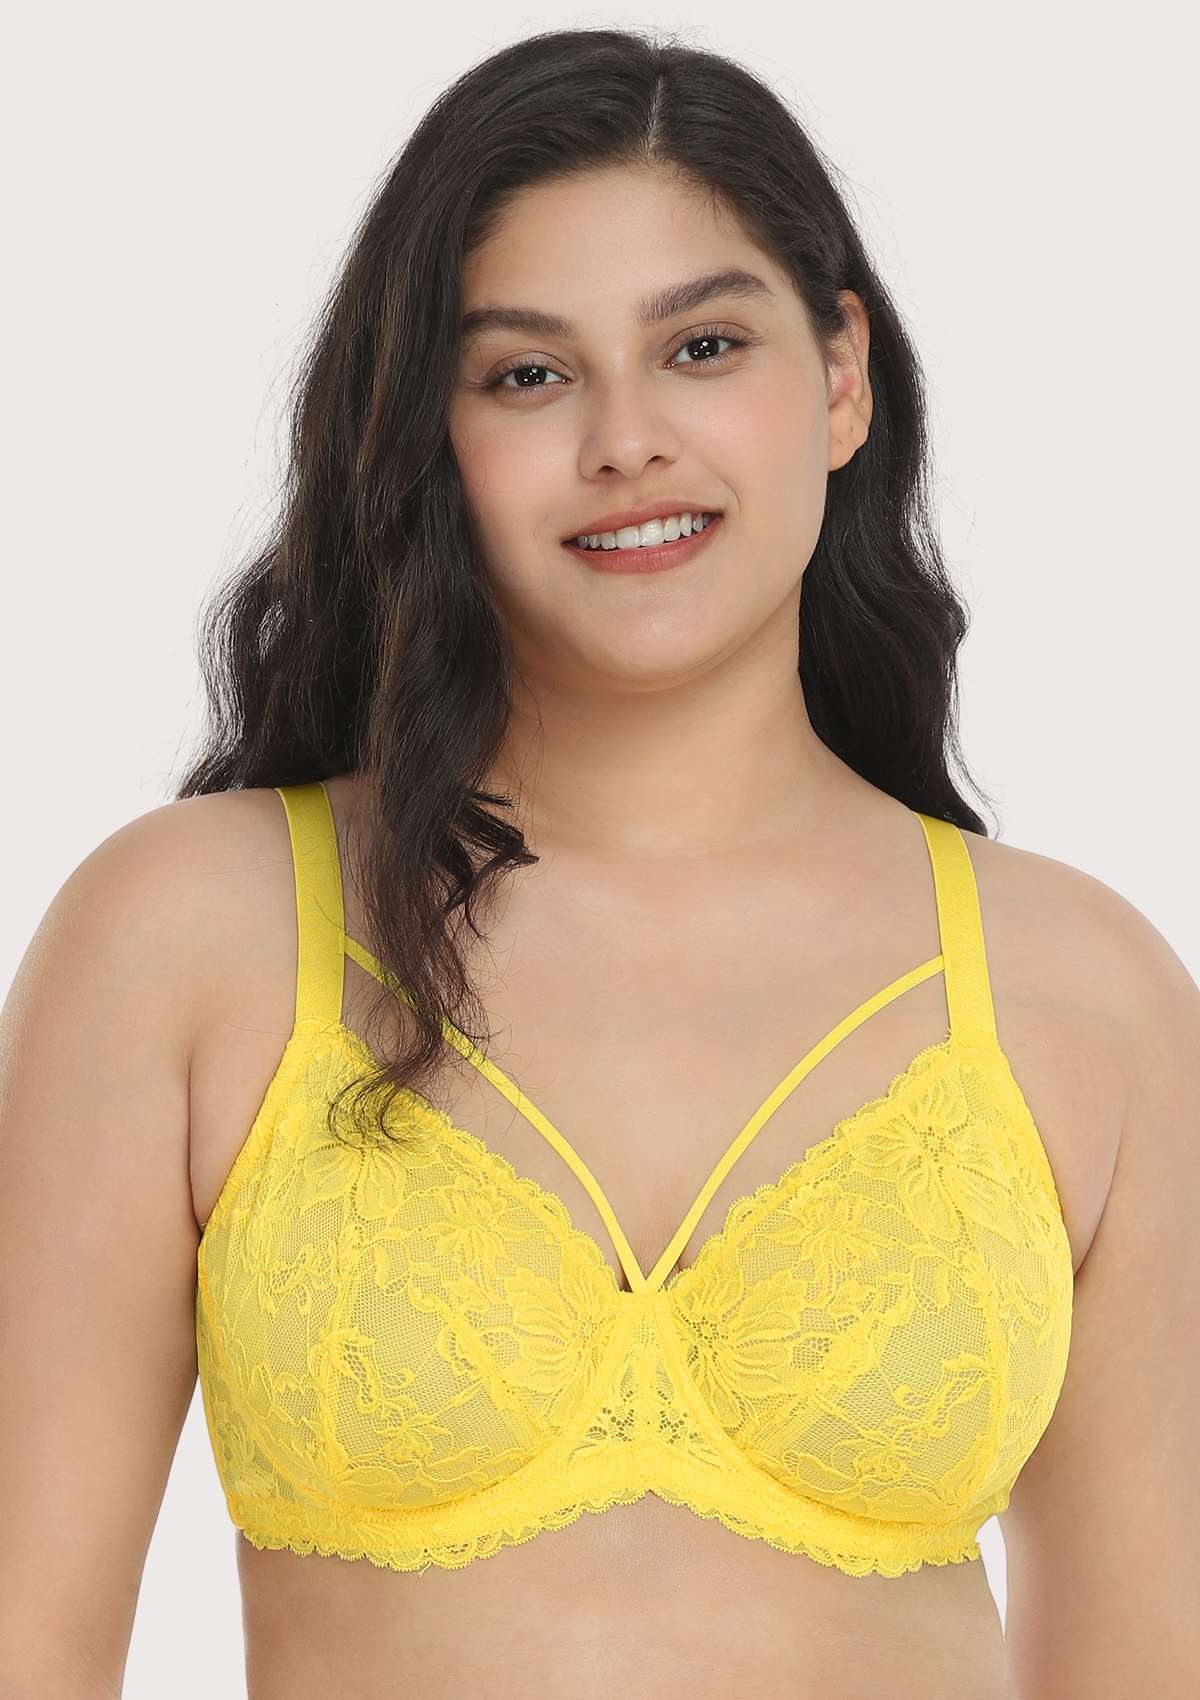 HSIA Unlined Lace Mesh Minimizer Bra For Large Breasts, Full Coverage - Bright Yellow / 38 / DD/E